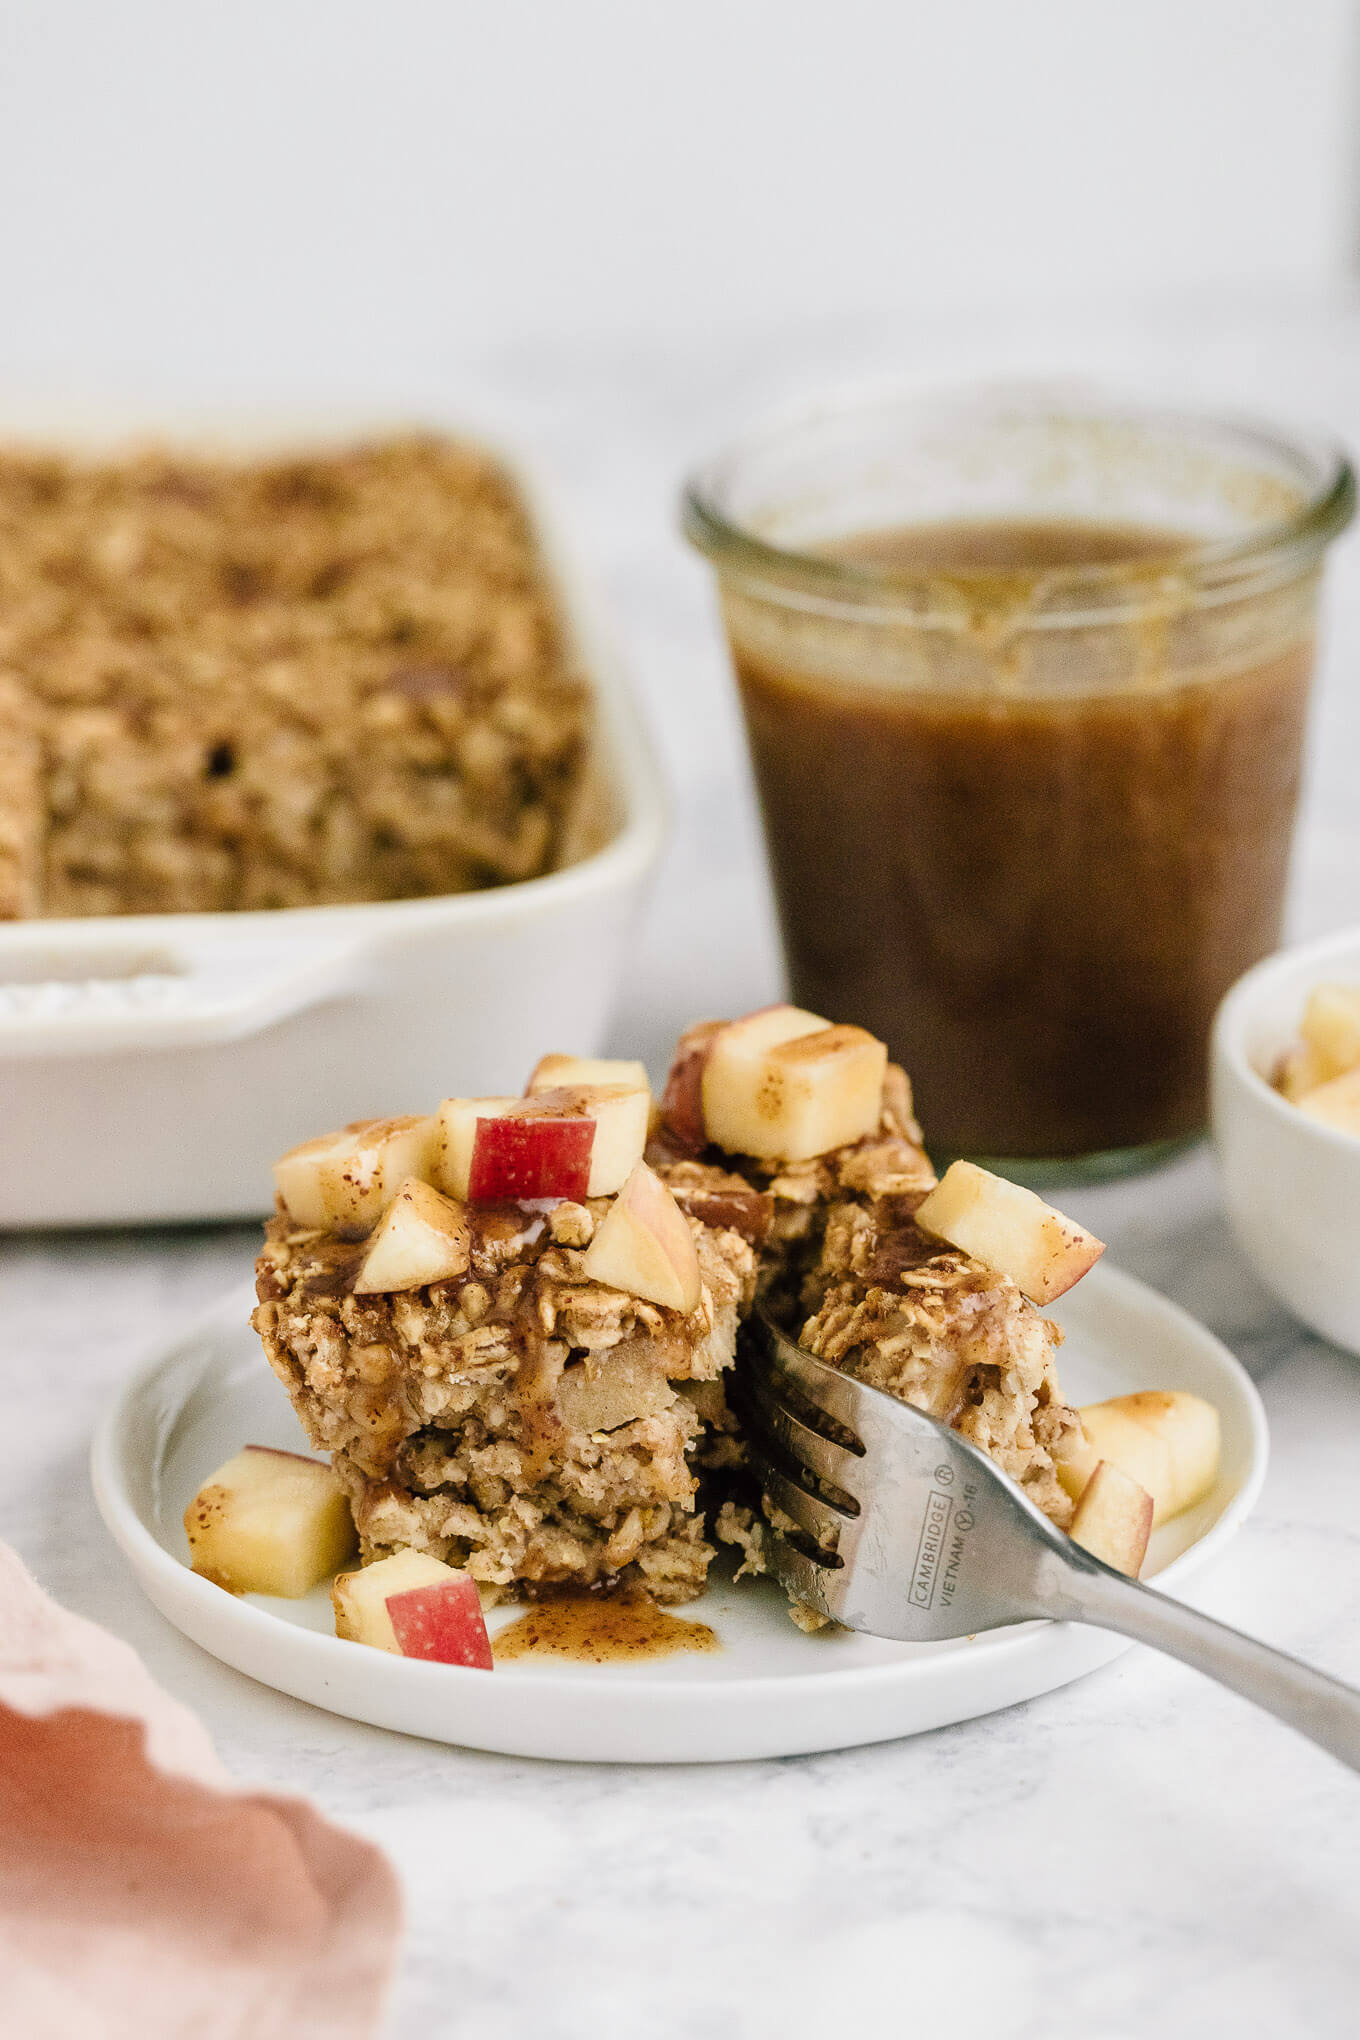 Apple Cinnamon Baked Oatmeal. A healthy fall breakfast packed with fresh apples.